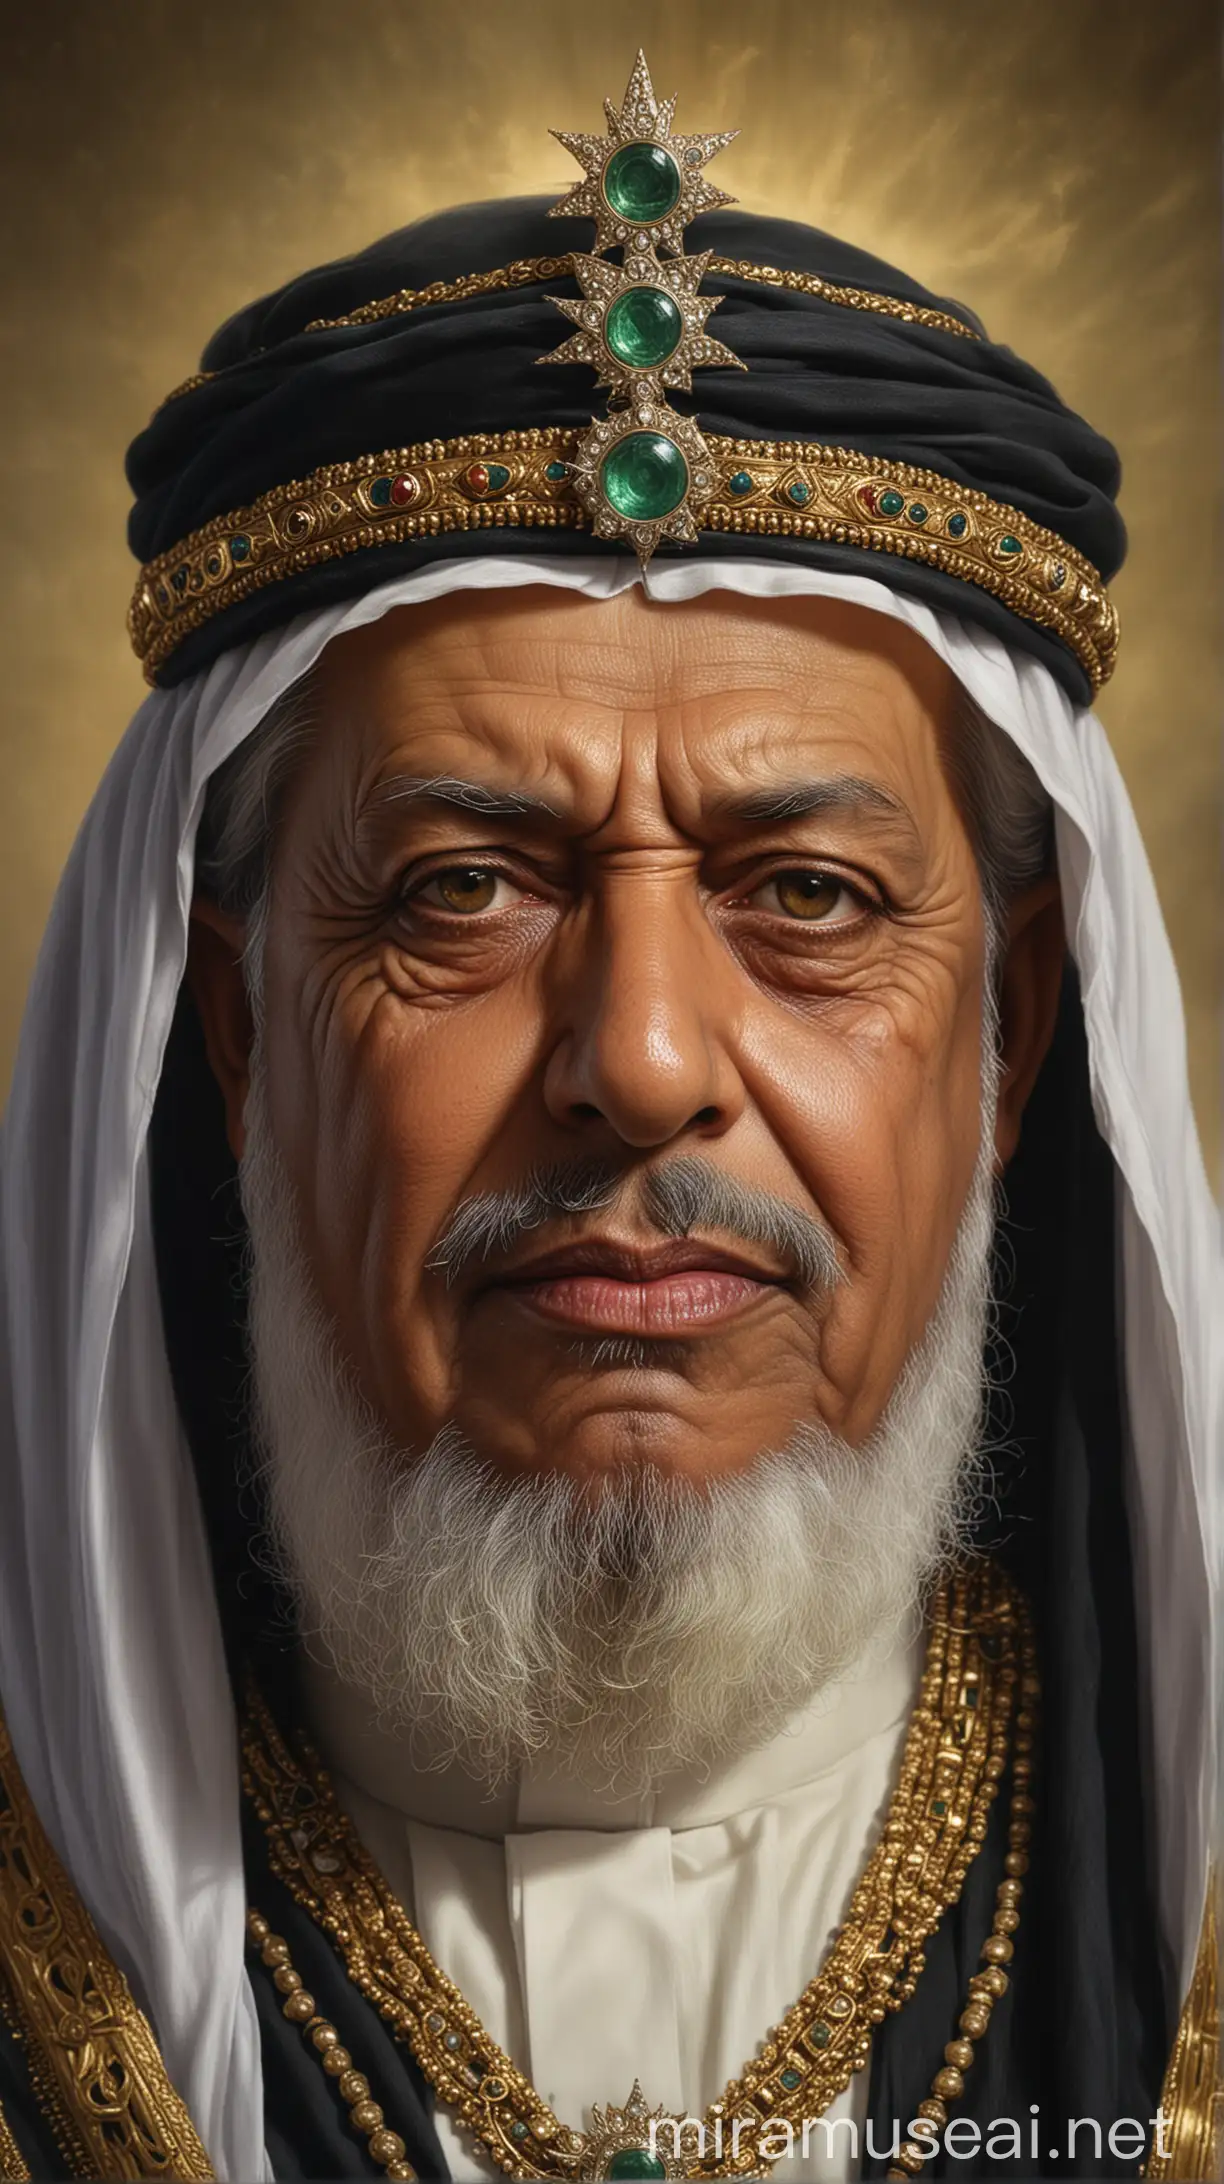 Hyper Realistic Portrait King Ismail Sharif with Piercing Gaze and Halo of Power